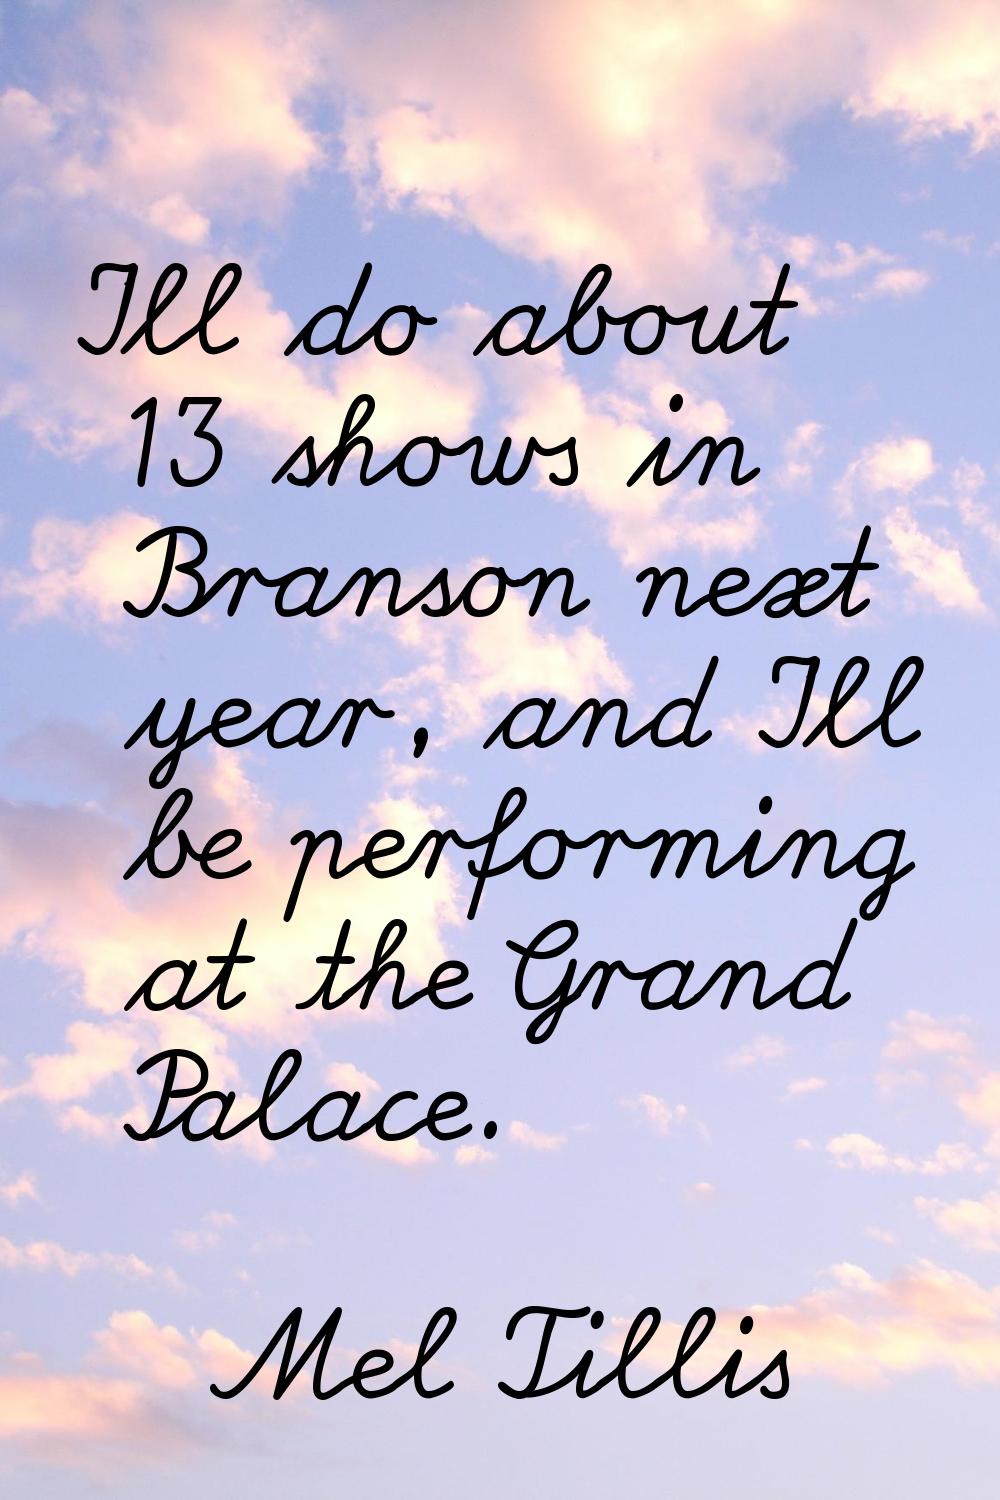 I'll do about 13 shows in Branson next year, and I'll be performing at the Grand Palace.